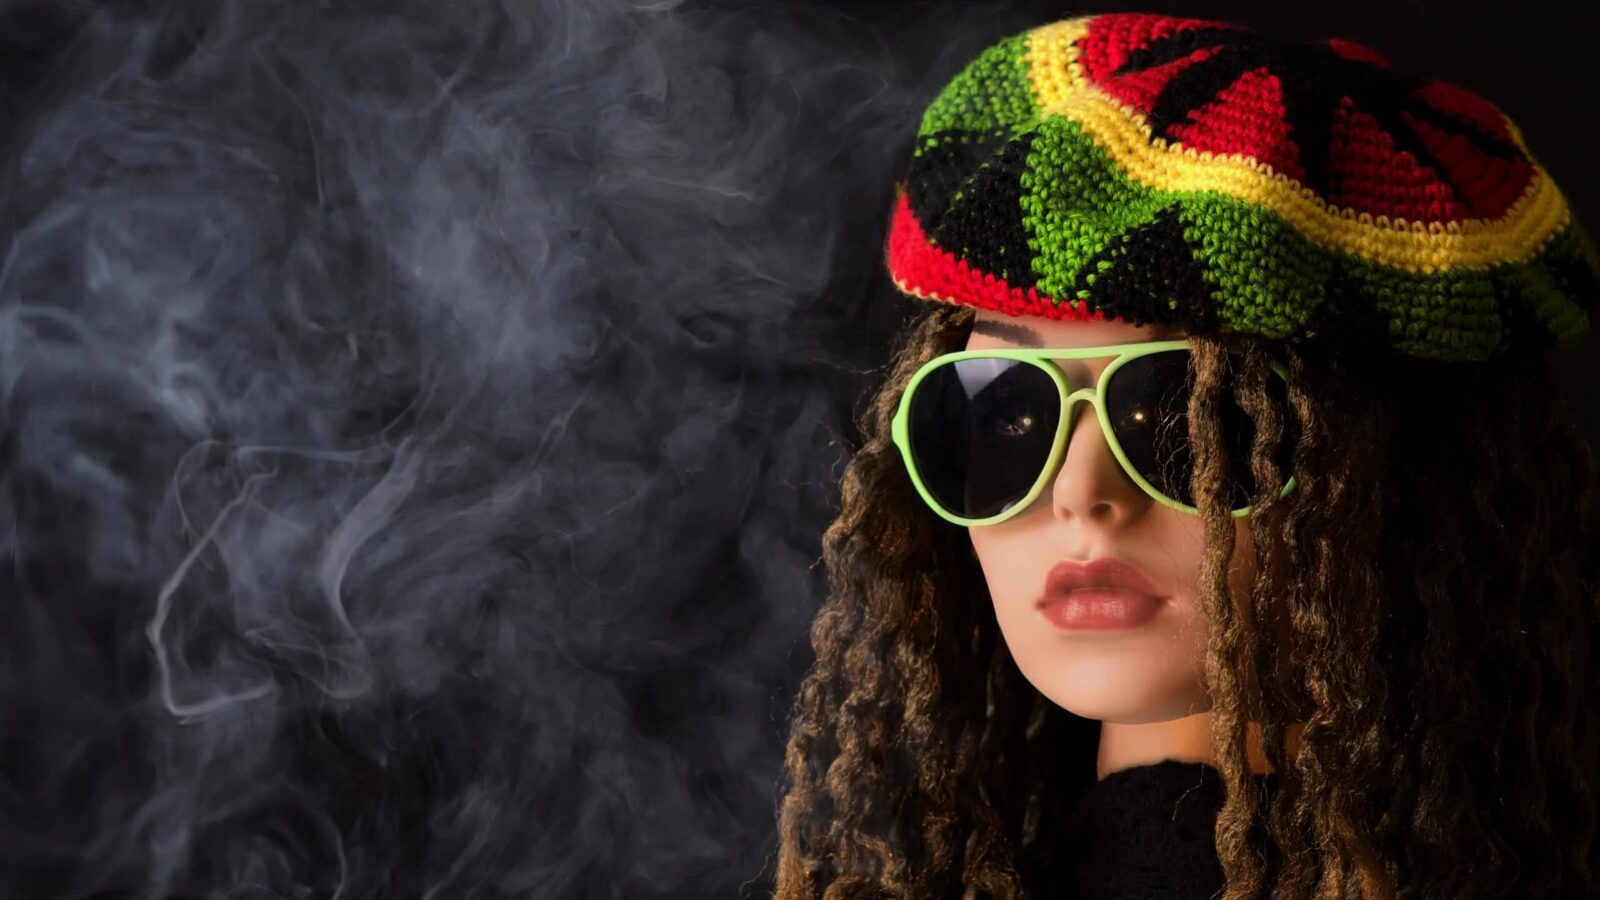 LiveWallpapers4Free.com | Brown Haired Babe With Sunglasses Hat Smoke 2K - Free Live Wallpaper